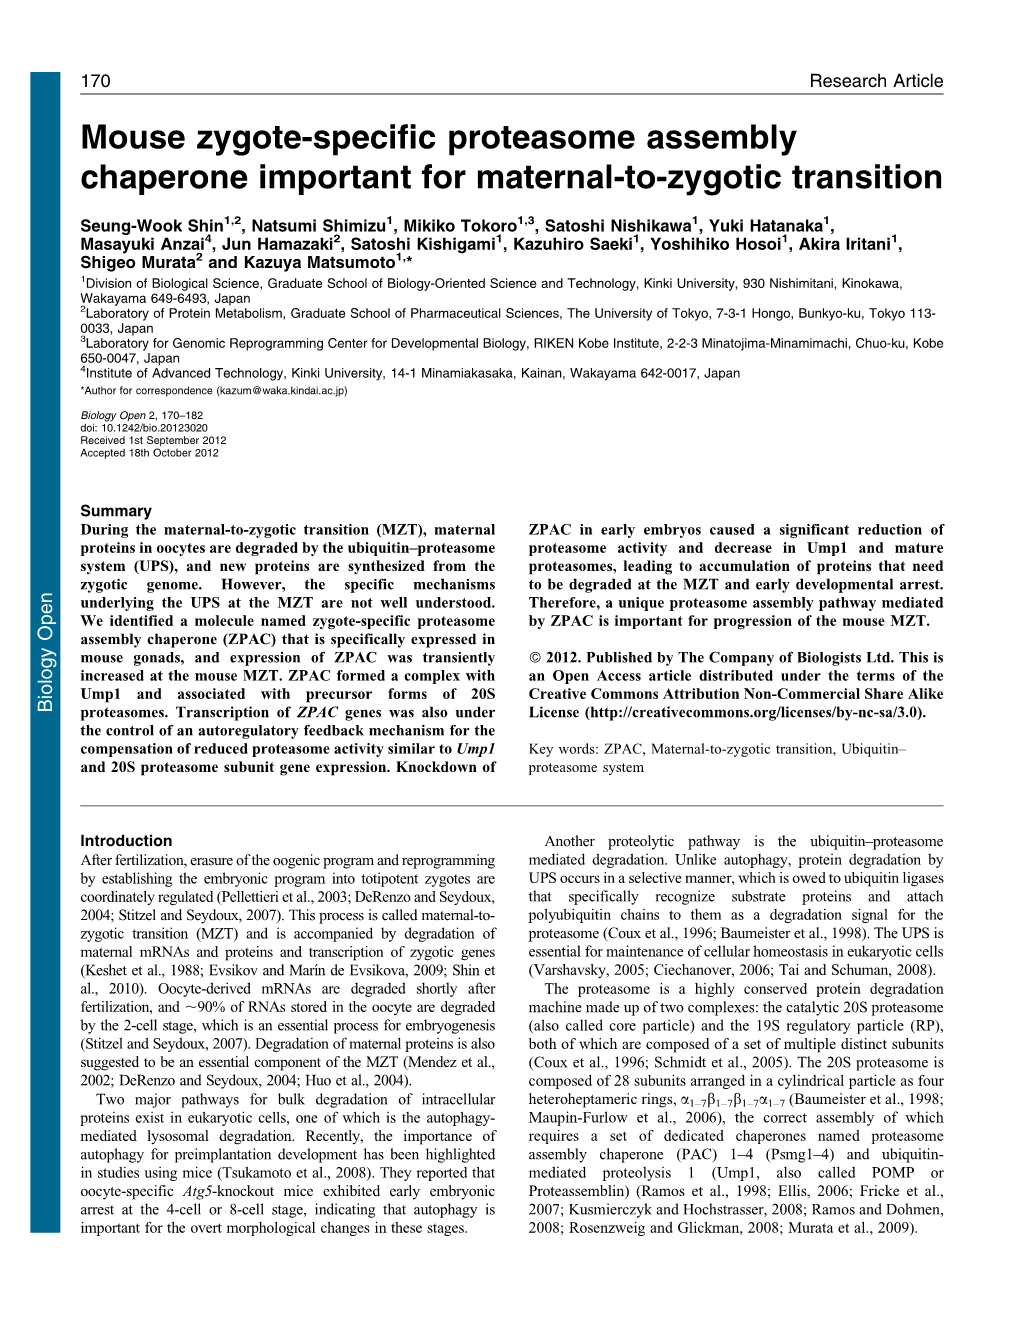 Mouse Zygote-Specific Proteasome Assembly Chaperone Important for Maternal-To-Zygotic Transition